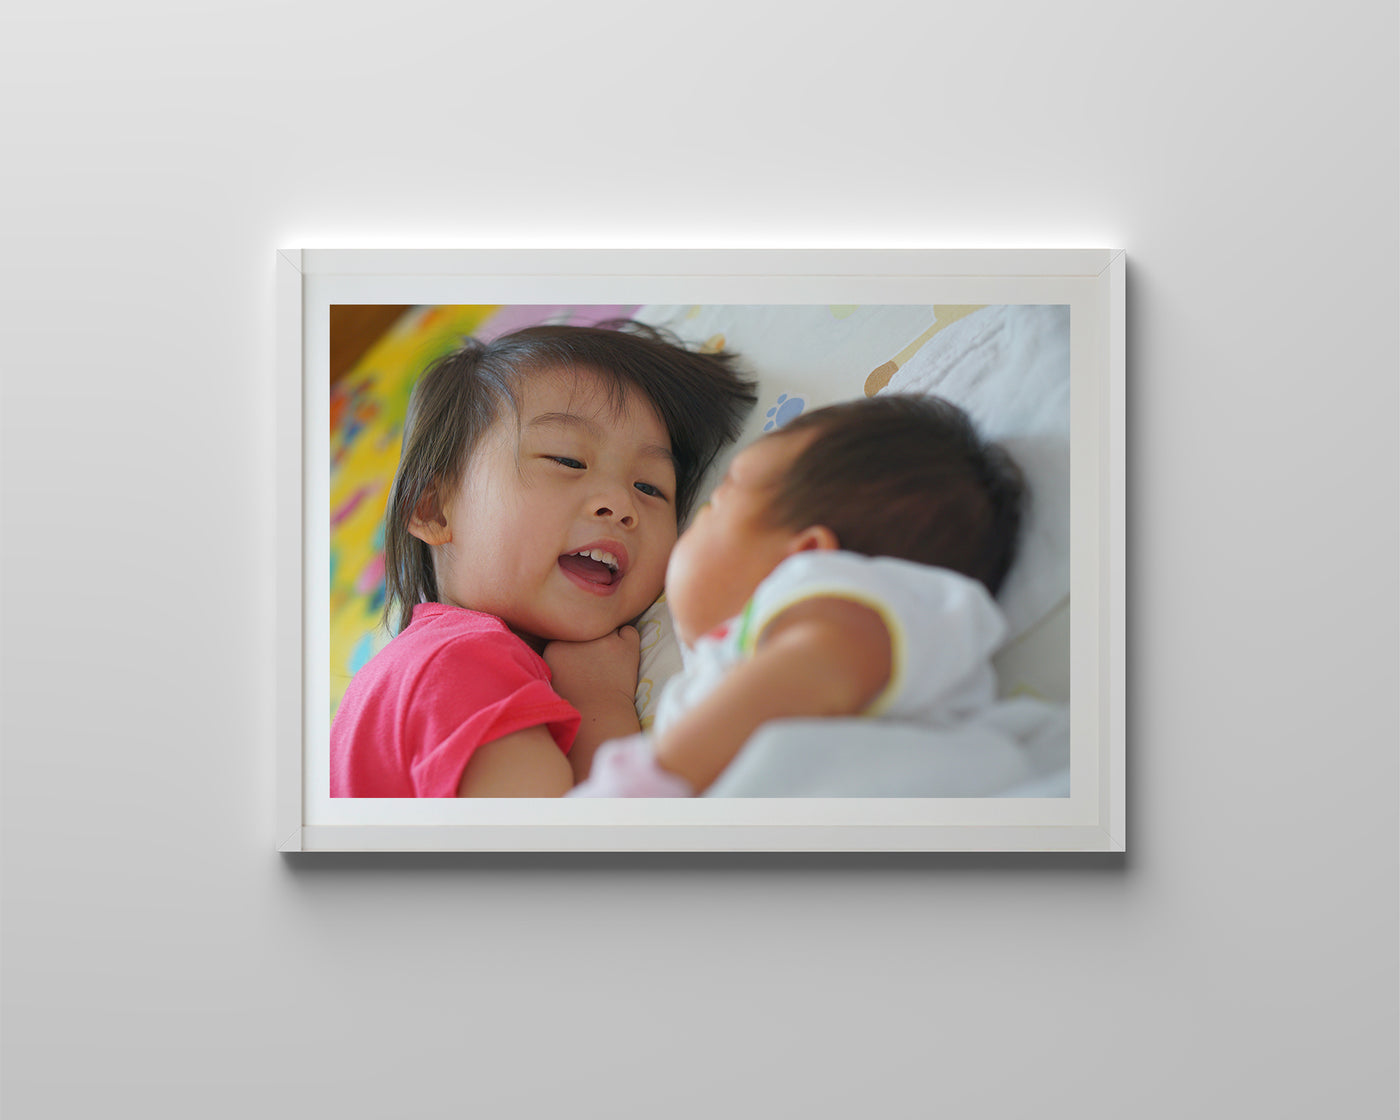 Playing With Newborn Sibling (Art Prints)